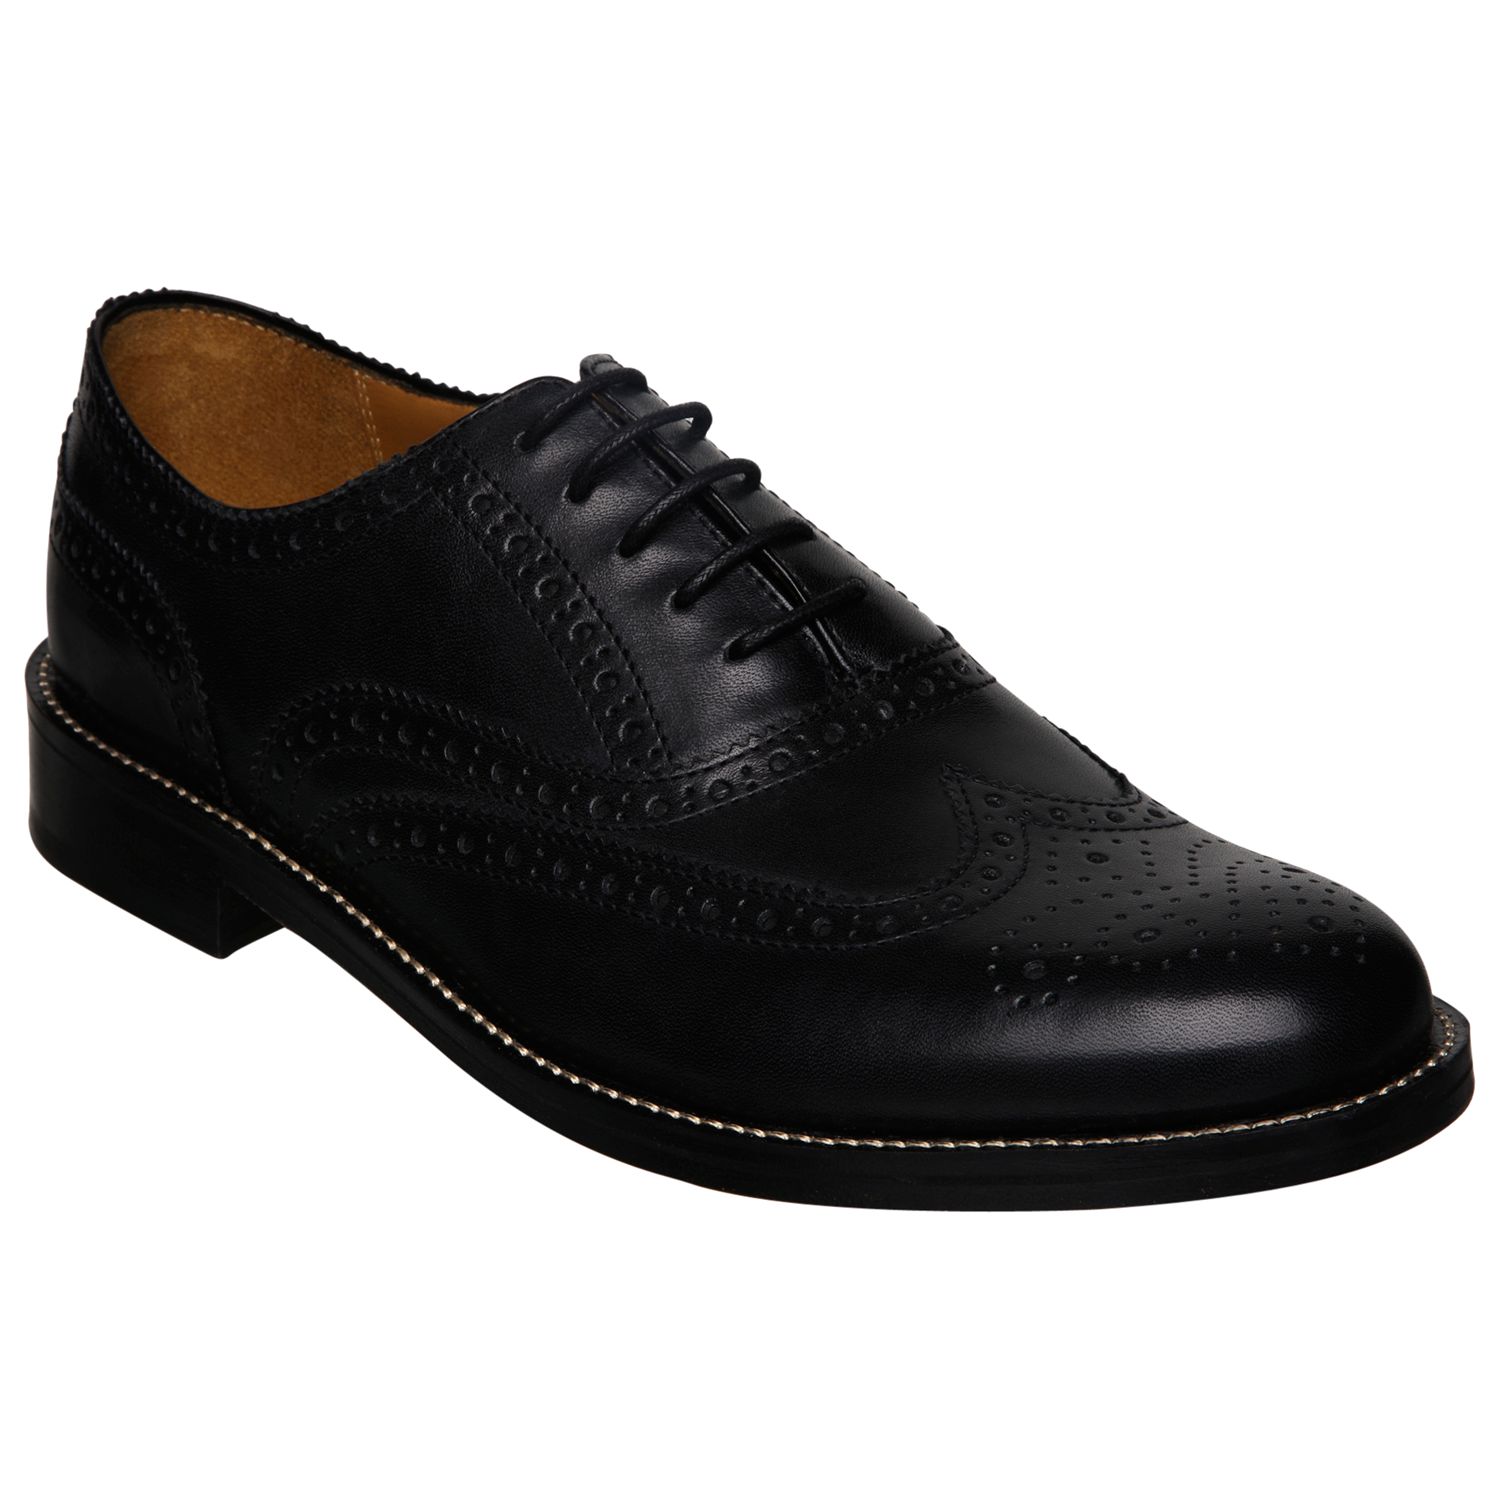 Dune Axton Leather Brogue Oxford Shoes